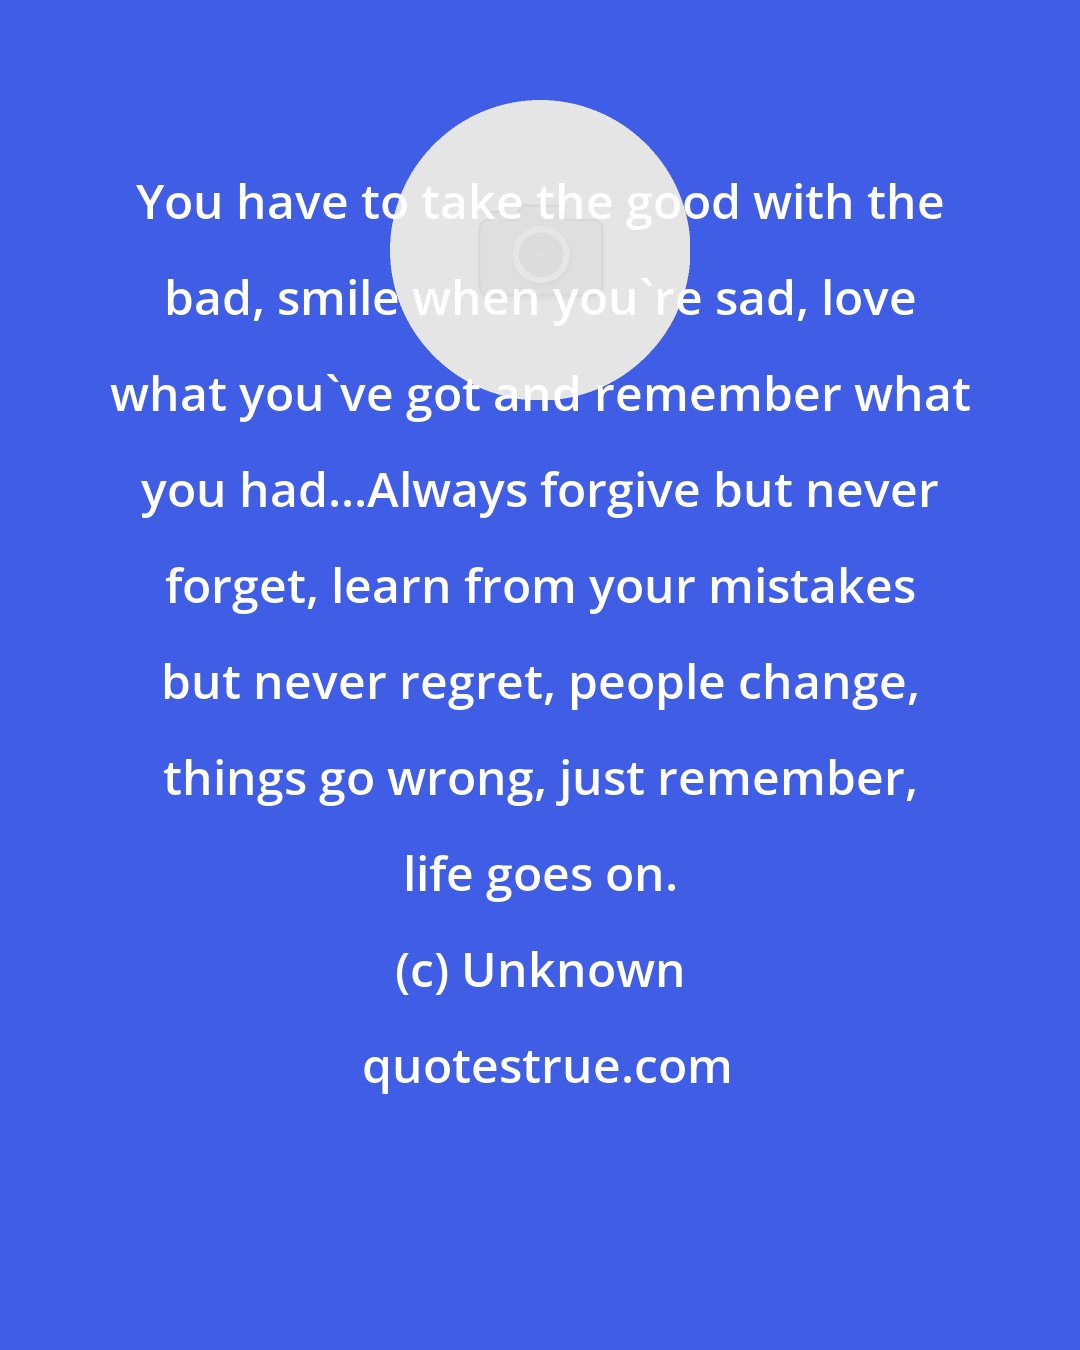 Unknown: You have to take the good with the bad, smile when you're sad, love what you've got and remember what you had...Always forgive but never forget, learn from your mistakes but never regret, people change, things go wrong, just remember, life goes on.